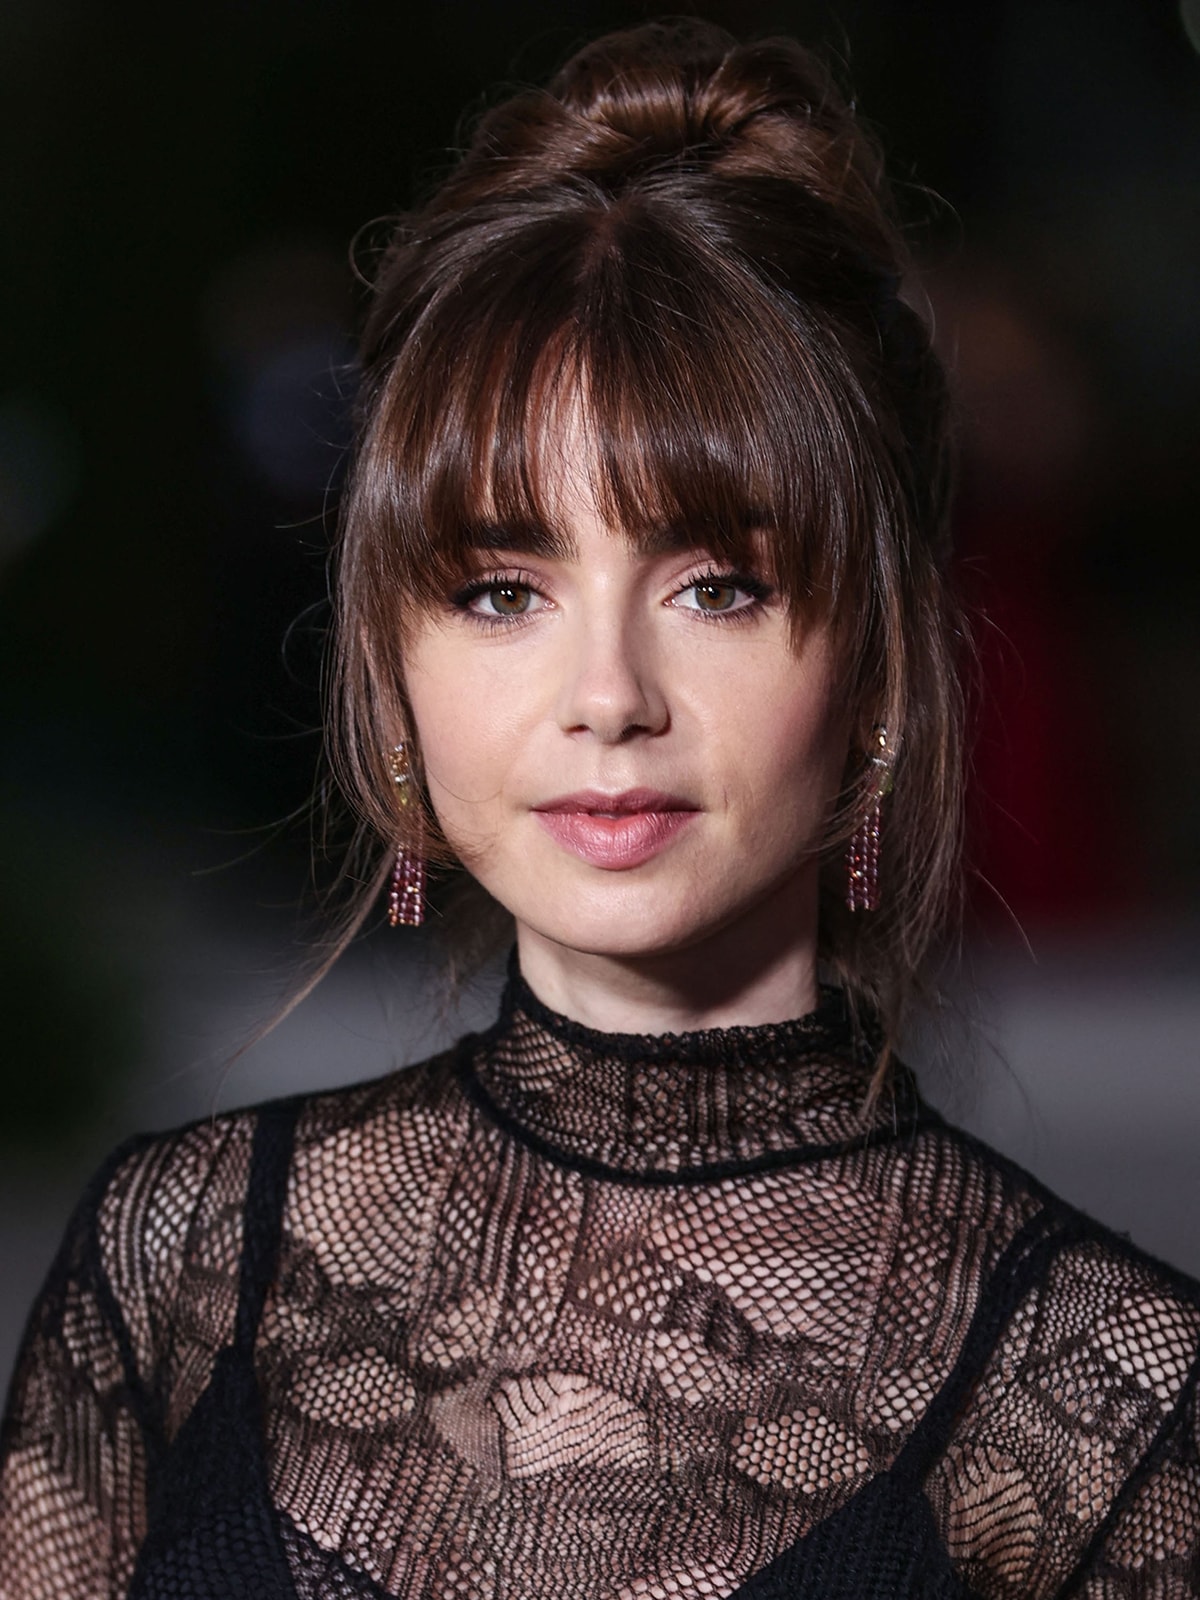 Lily Collins styles her hair in a chic bun with her signature bangs framing her minimally made-up face